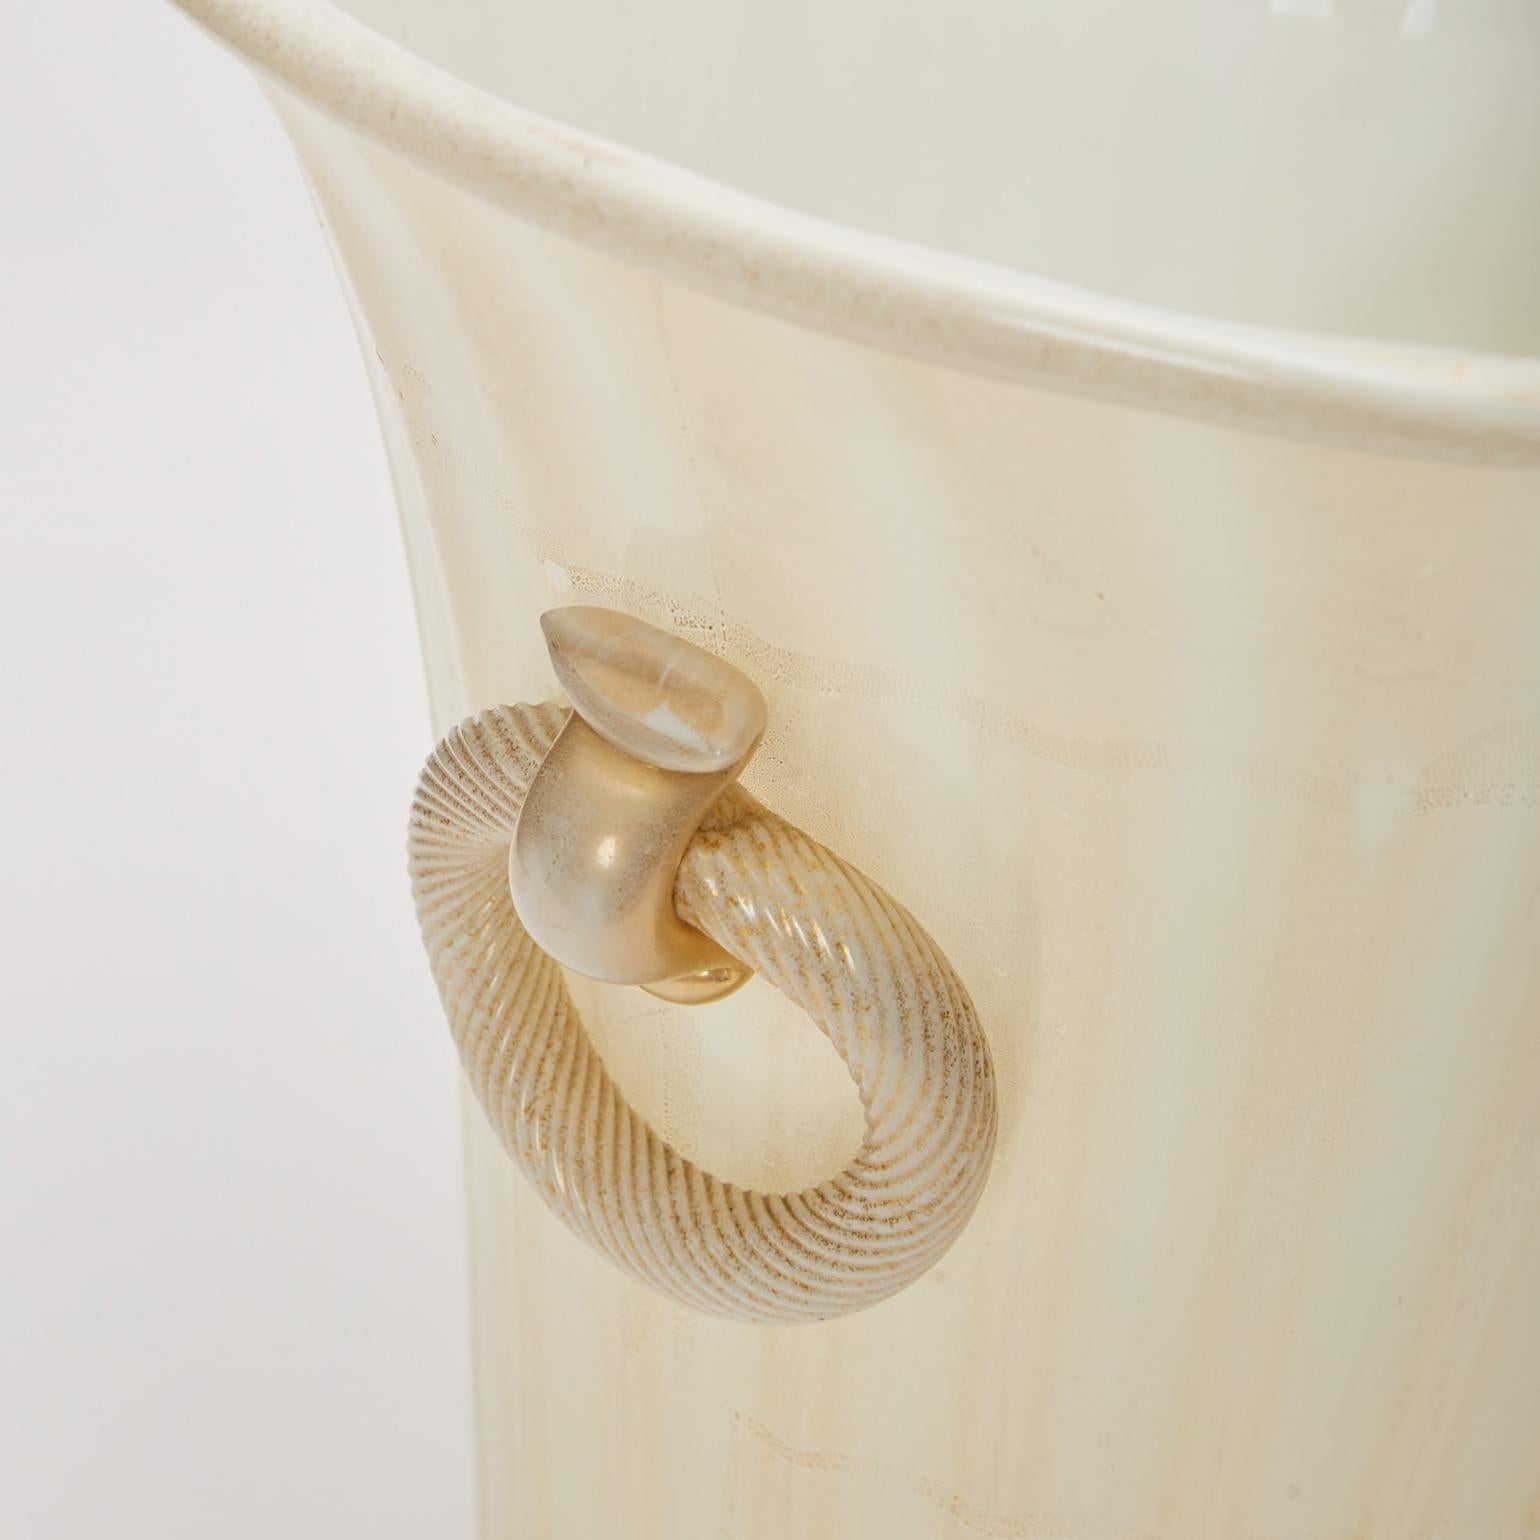 Large Twin-Handled Vase by Ercole Barovier for Barovier and Toso, 1956 For Sale 2